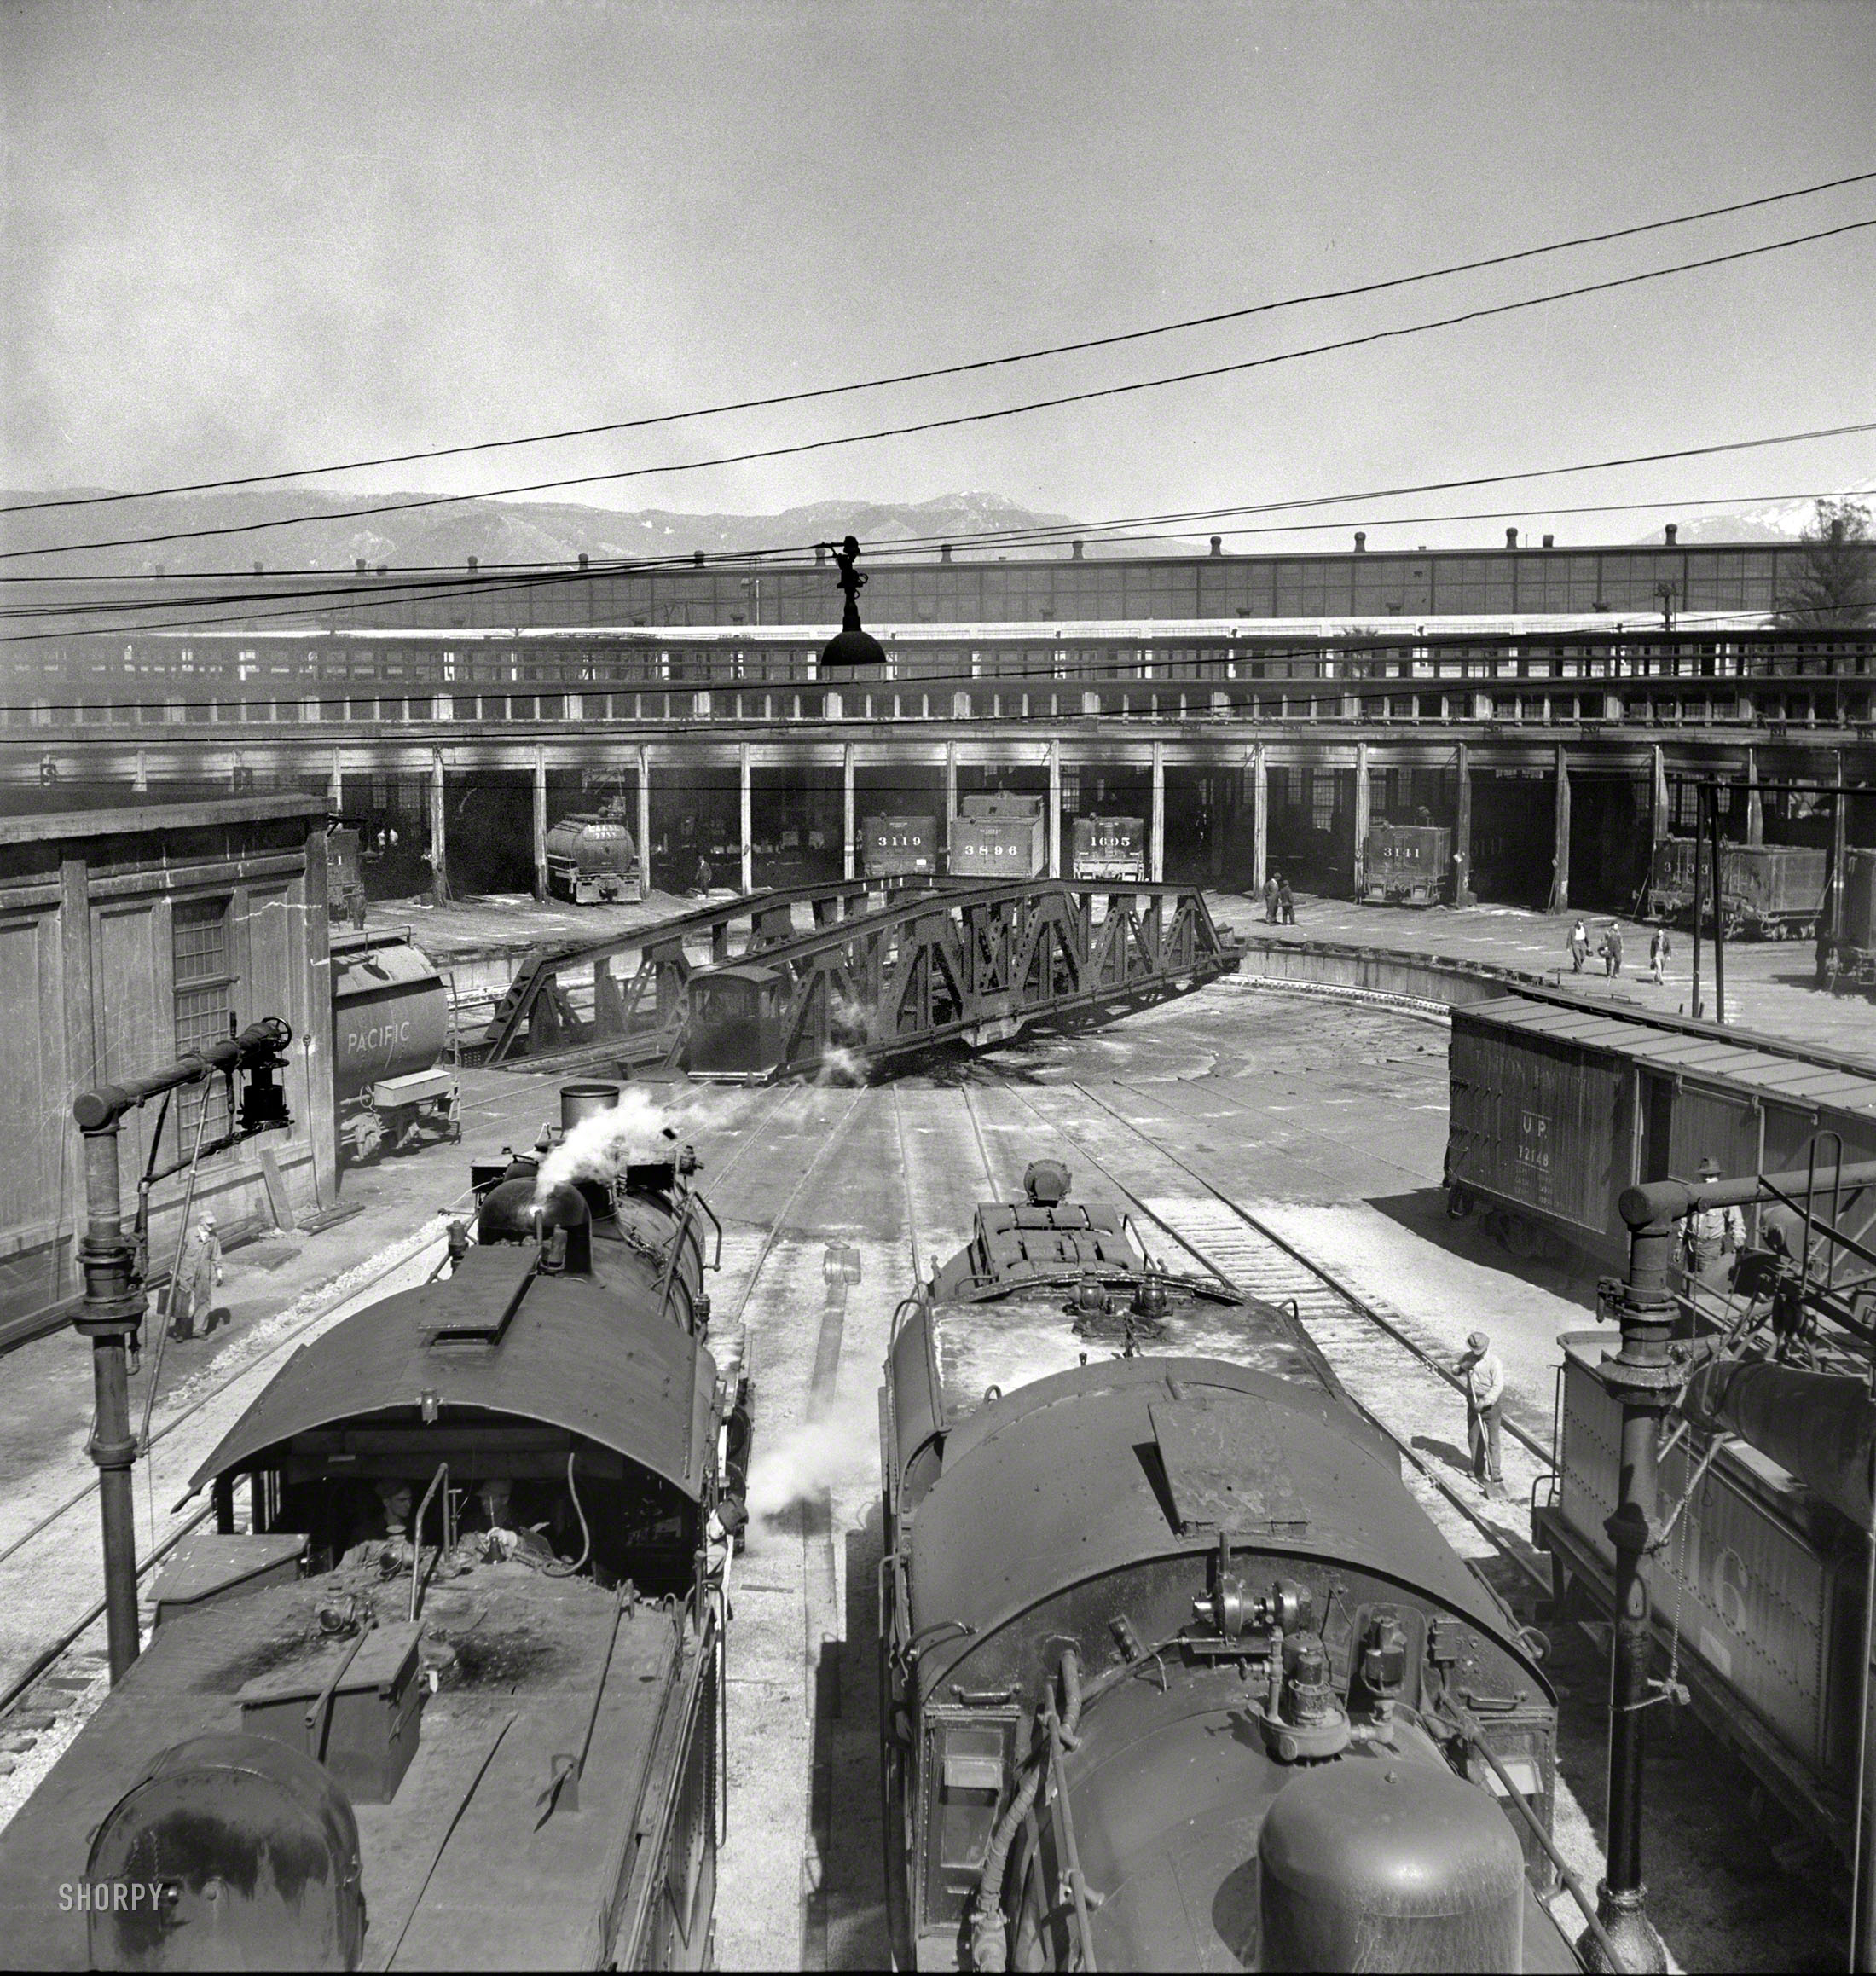 March 1943. "San Bernardino, Calif. Engines at the roundhouse." Medium-format negative by Jack Delano for the Office of War Information. View full size.